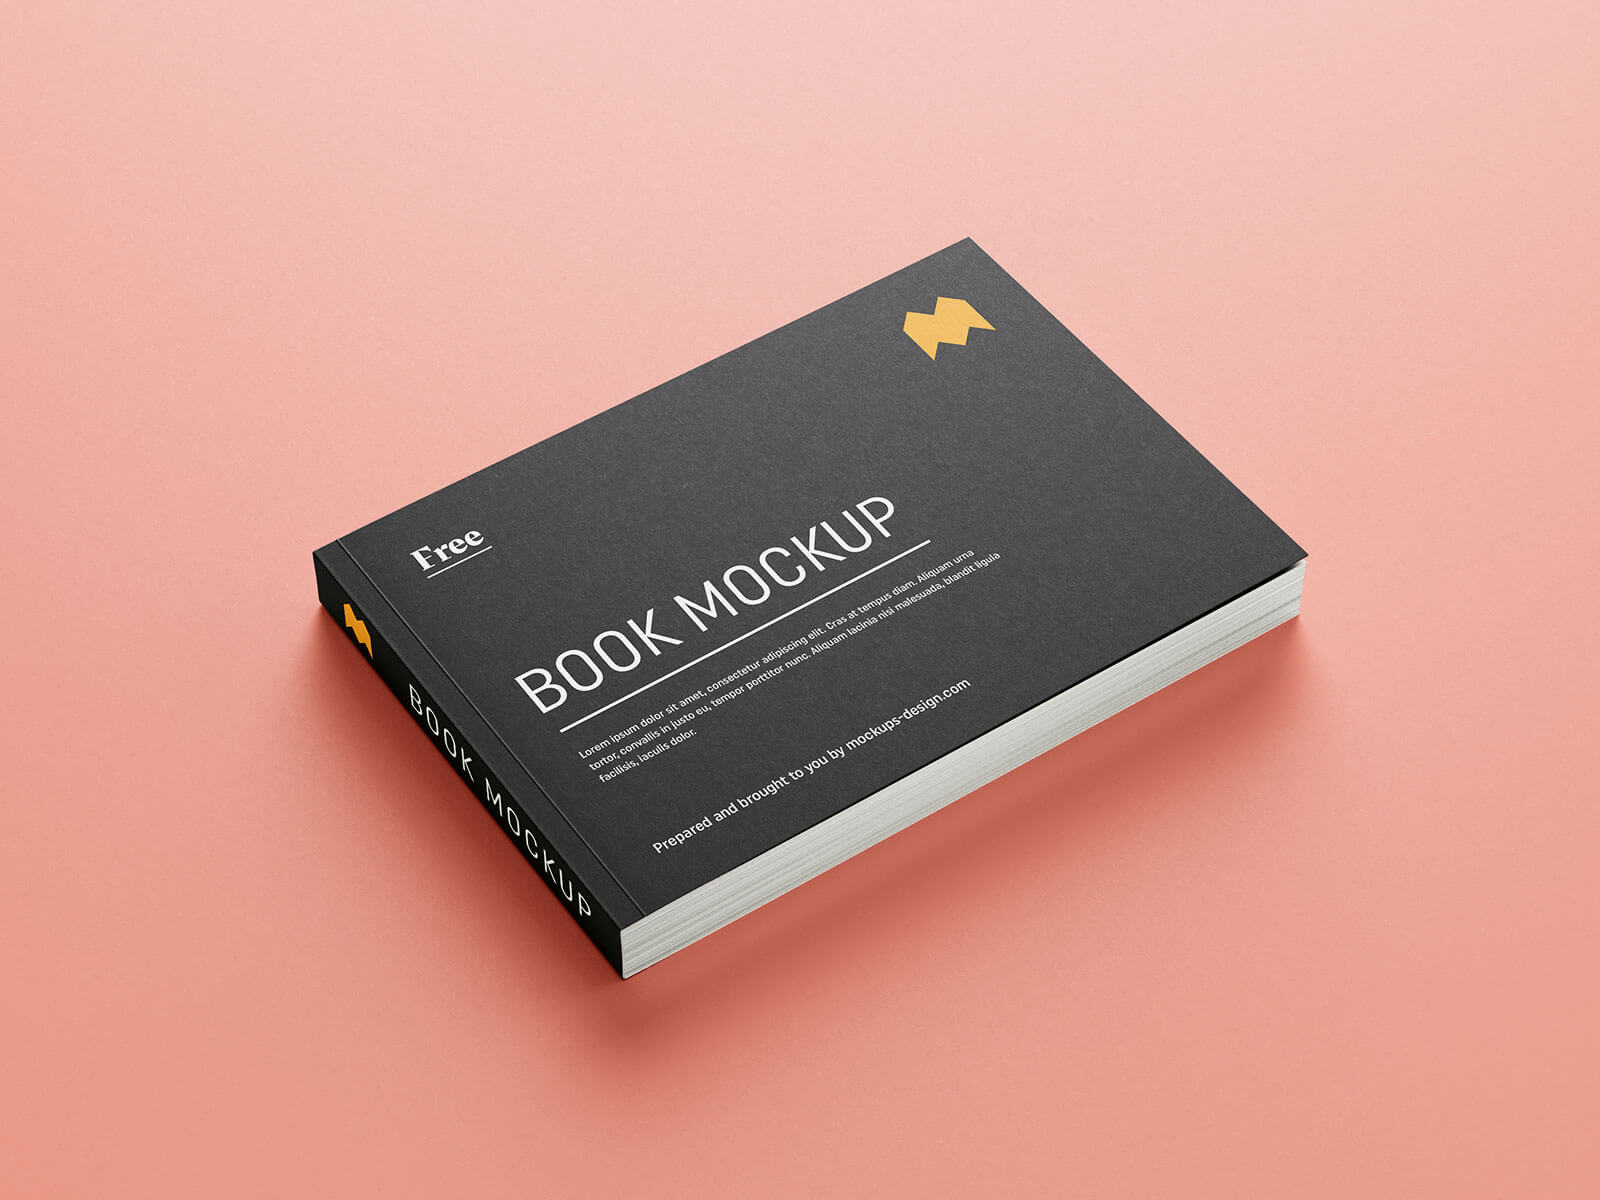 A sleek, professional landscape book mockup with a black cover displaying a design template, resting on a soft pink background.